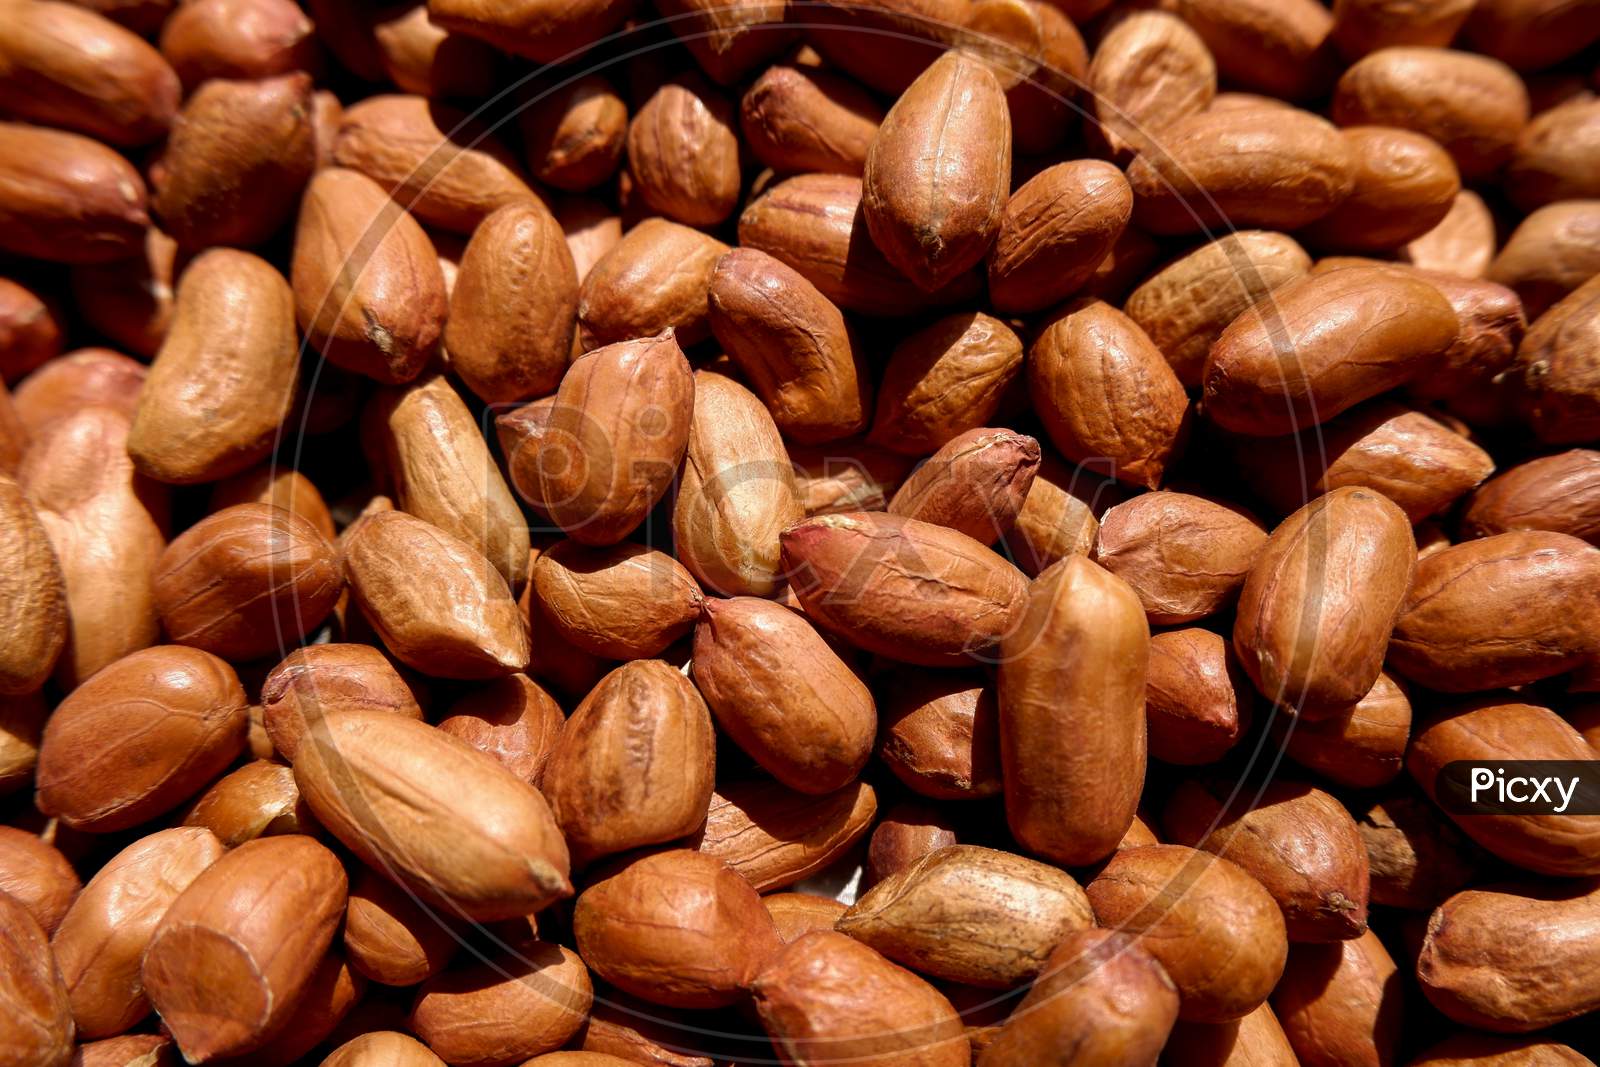 A Close Up View Of Brown Color Groundnuts Or Peanuts Gathering